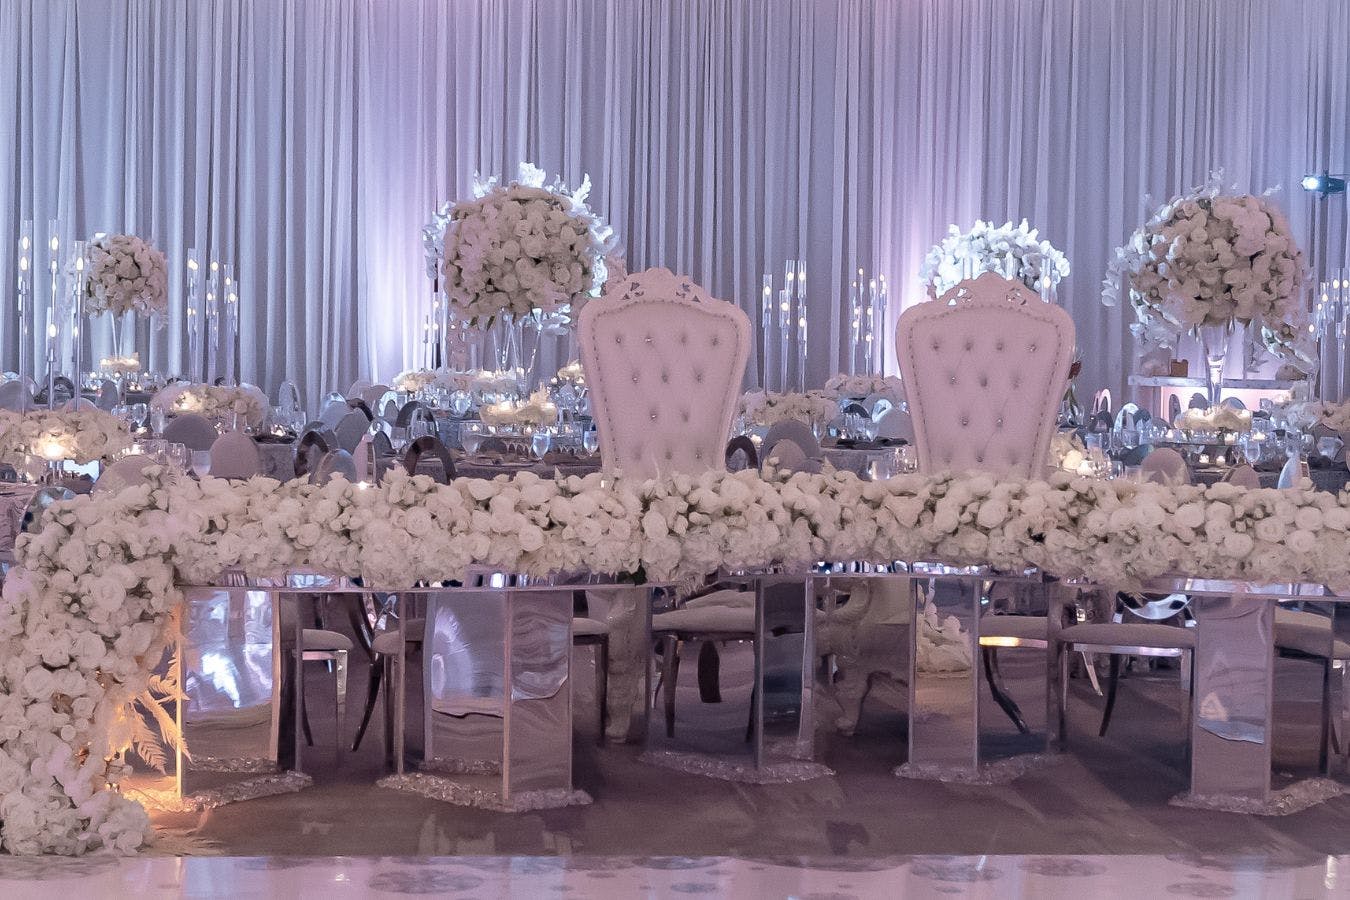 Glamorous mirrored sweetheart table with white throne seating and cascade of white table florals | PartySlate